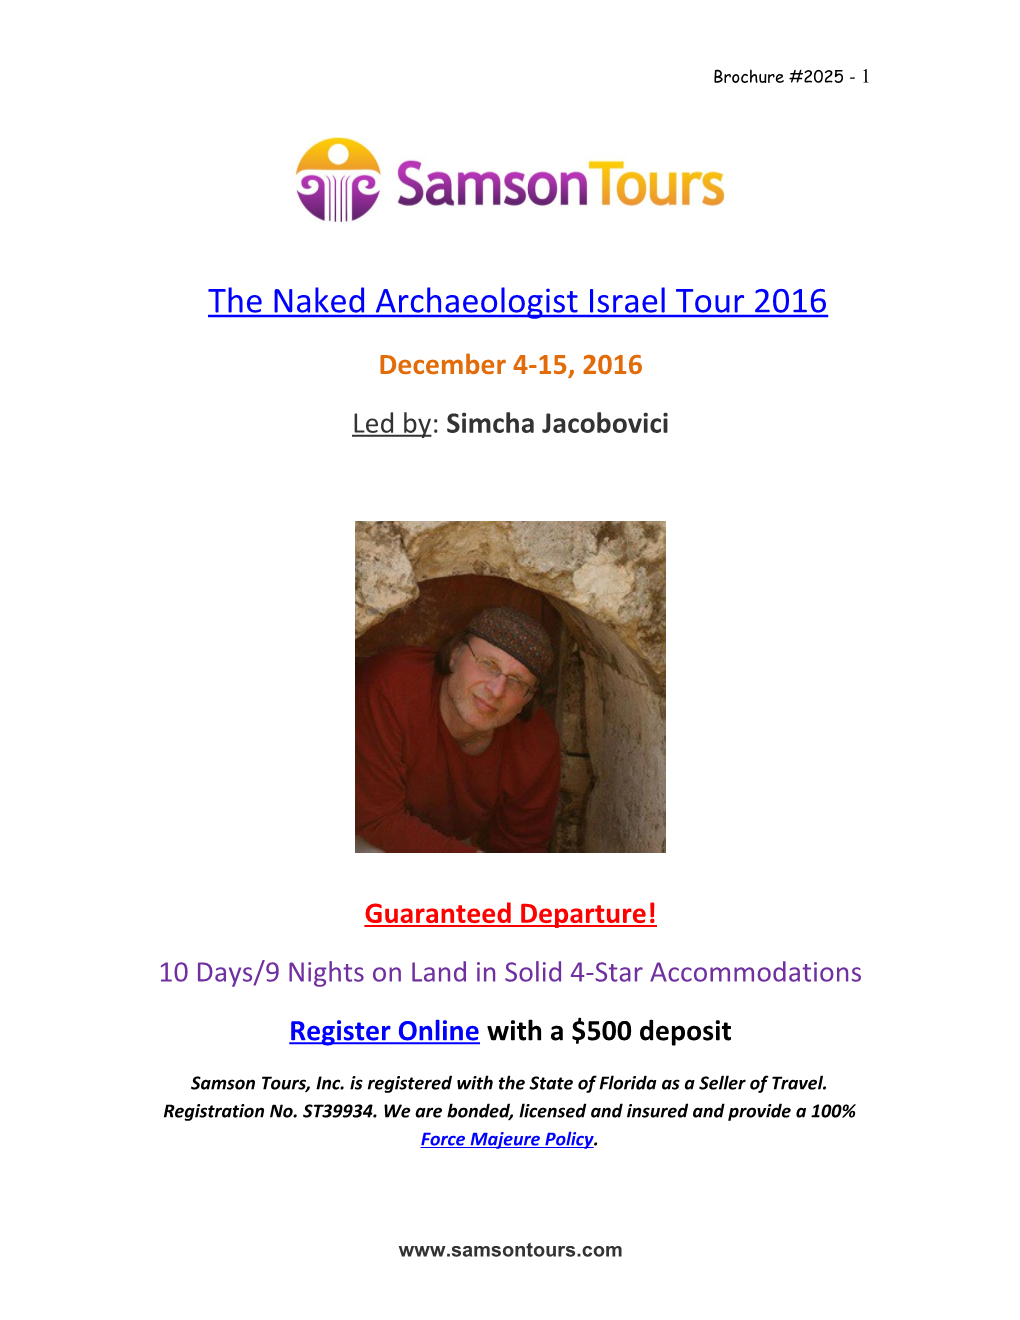 The Naked Archaeologist Israel Tour 2016